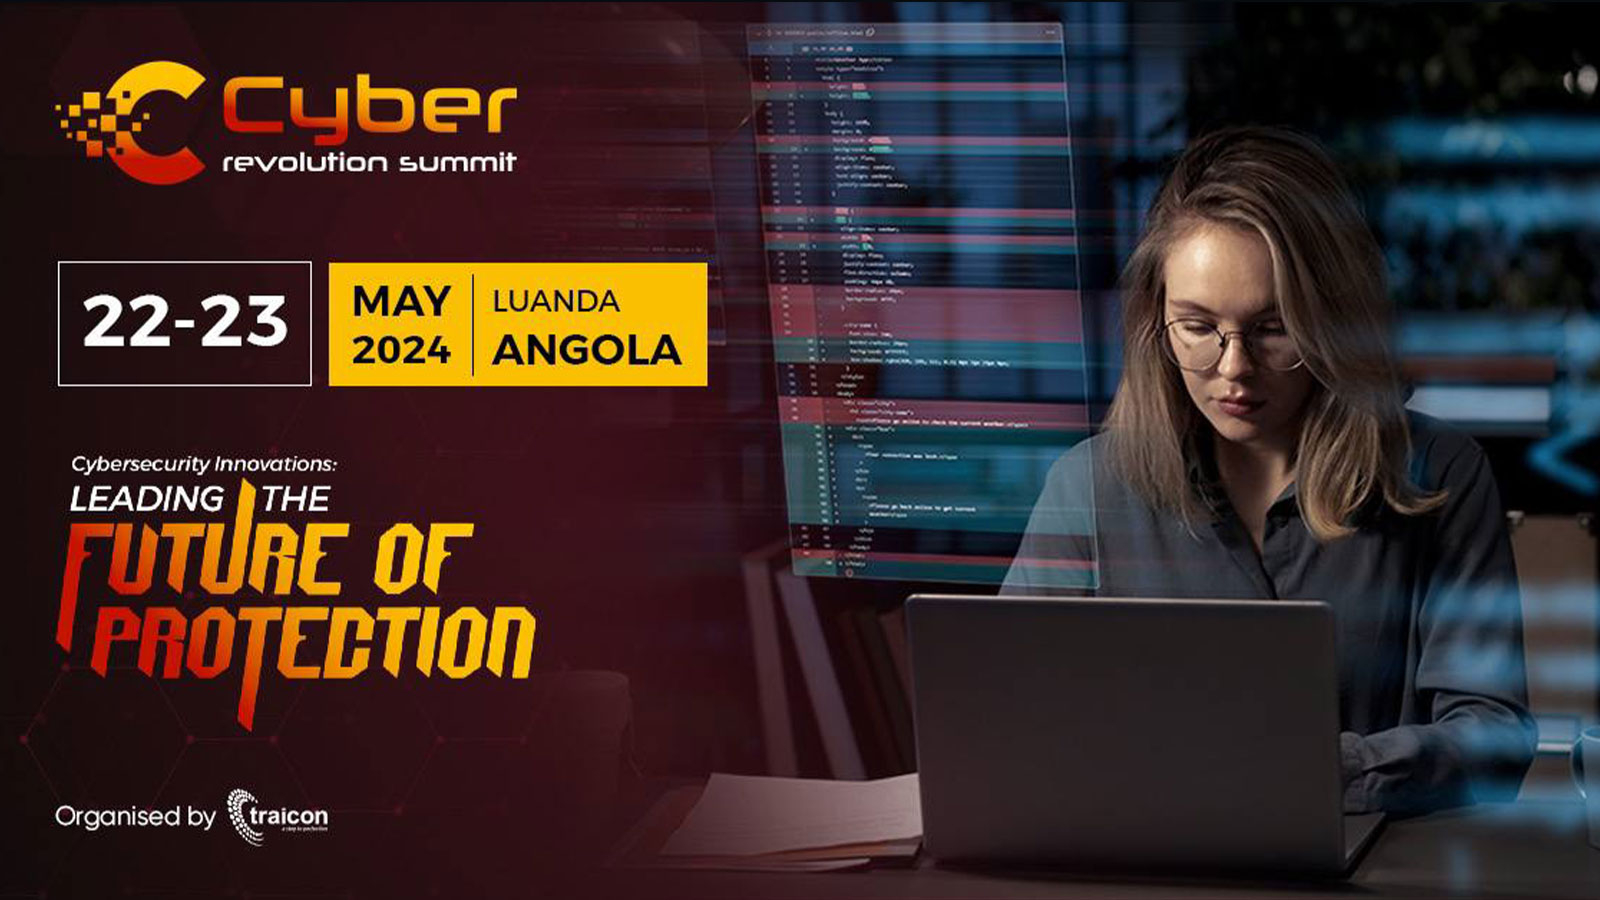 Angola Cyber Revolution Summit 2024 – Cybersecurity Innovations: Leading the Future of Protection